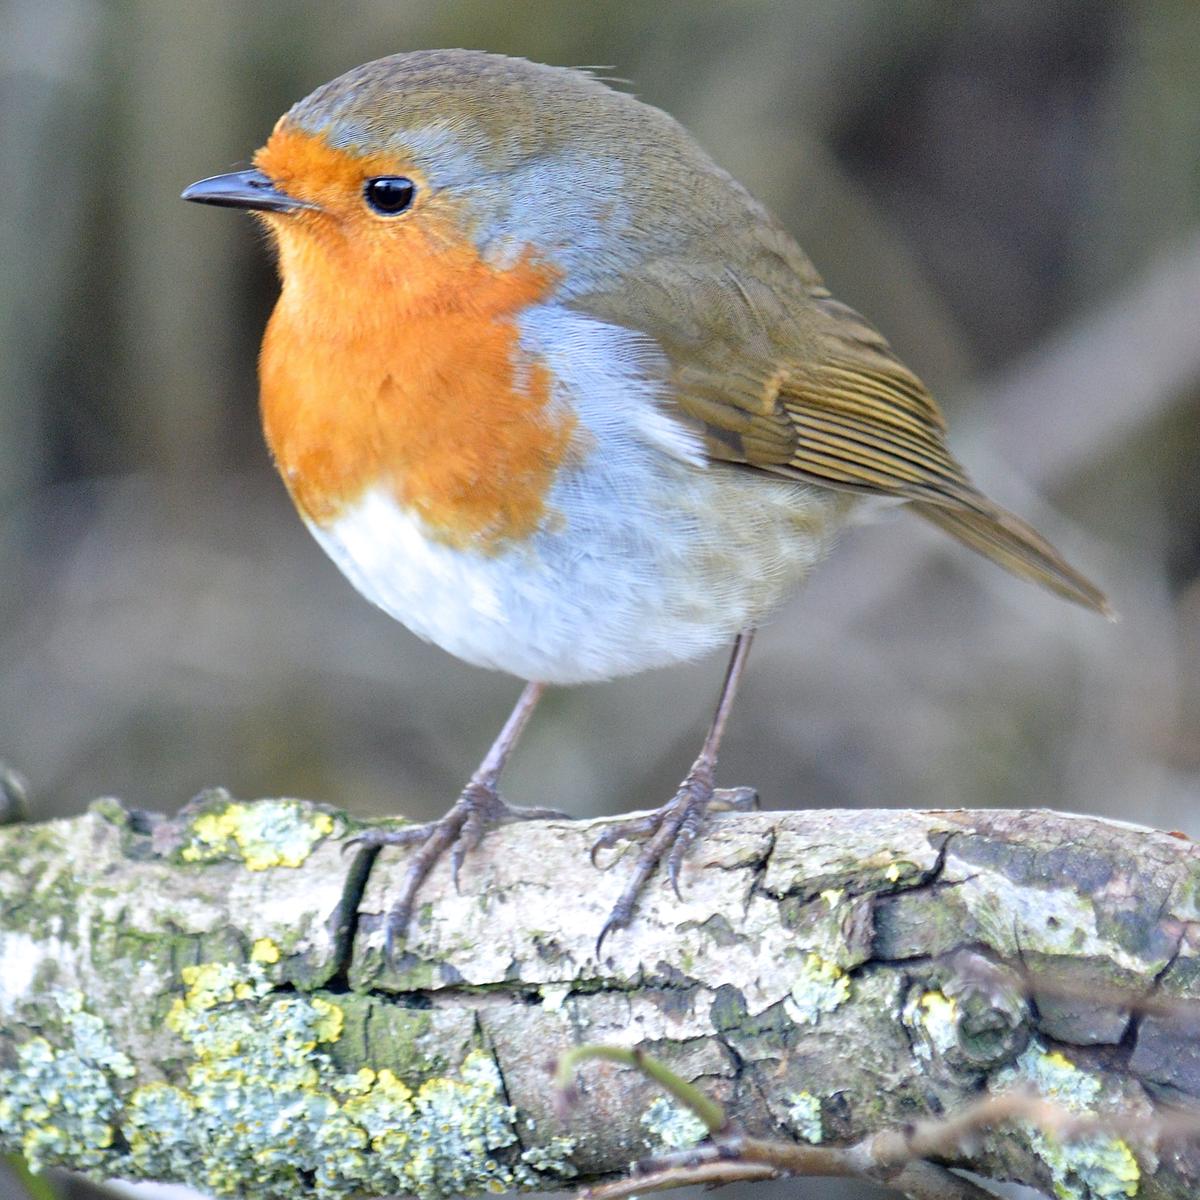 Image depicting robins foraging for food in the snow during winter